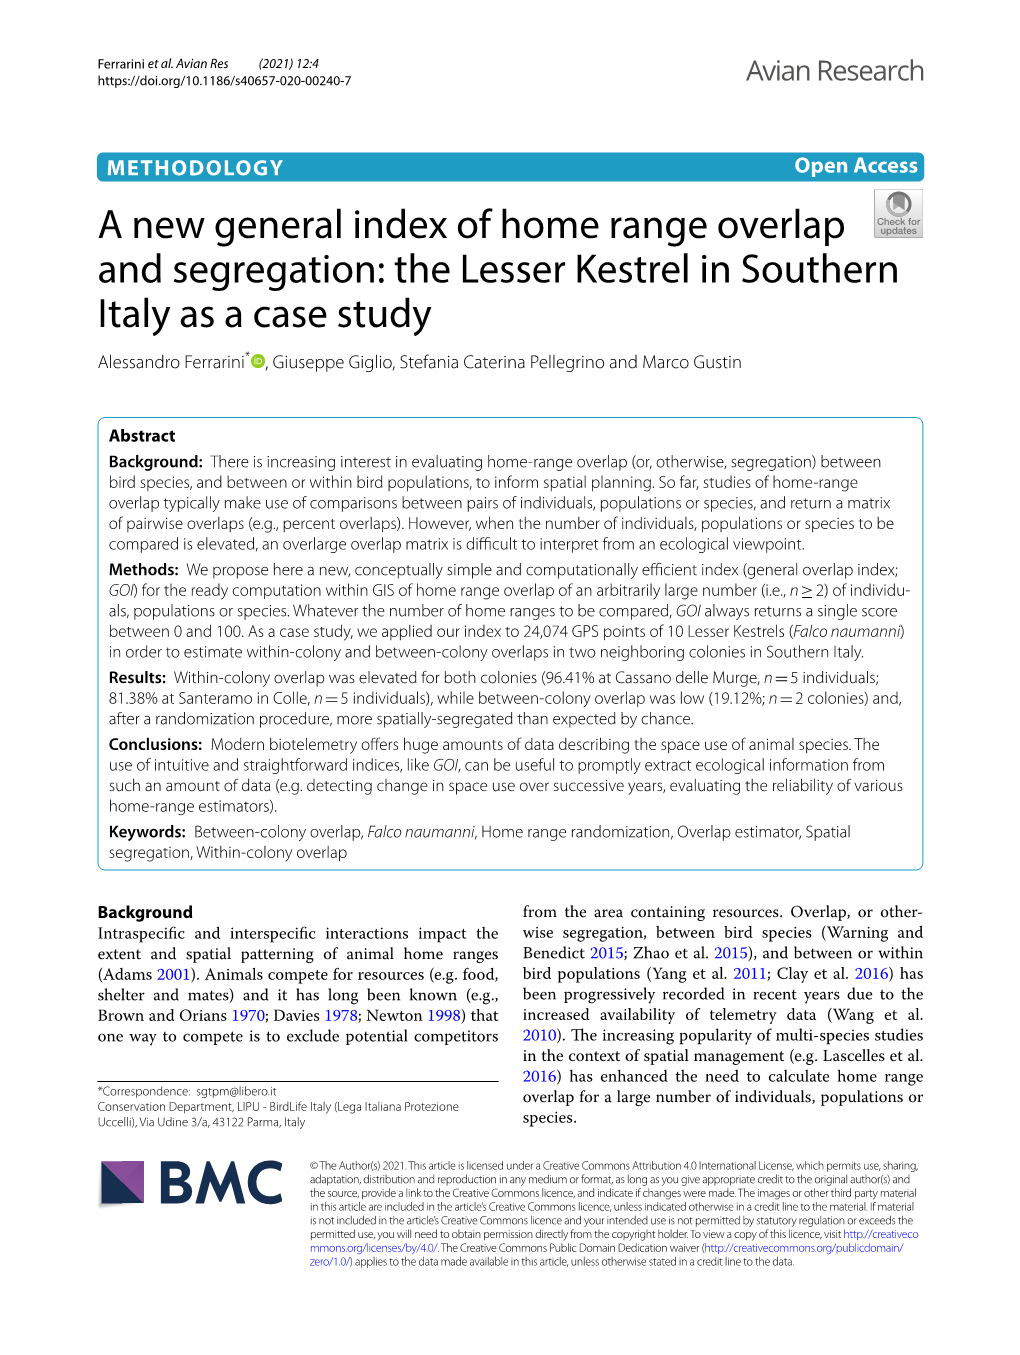 A New General Index of Home Range Overlap And